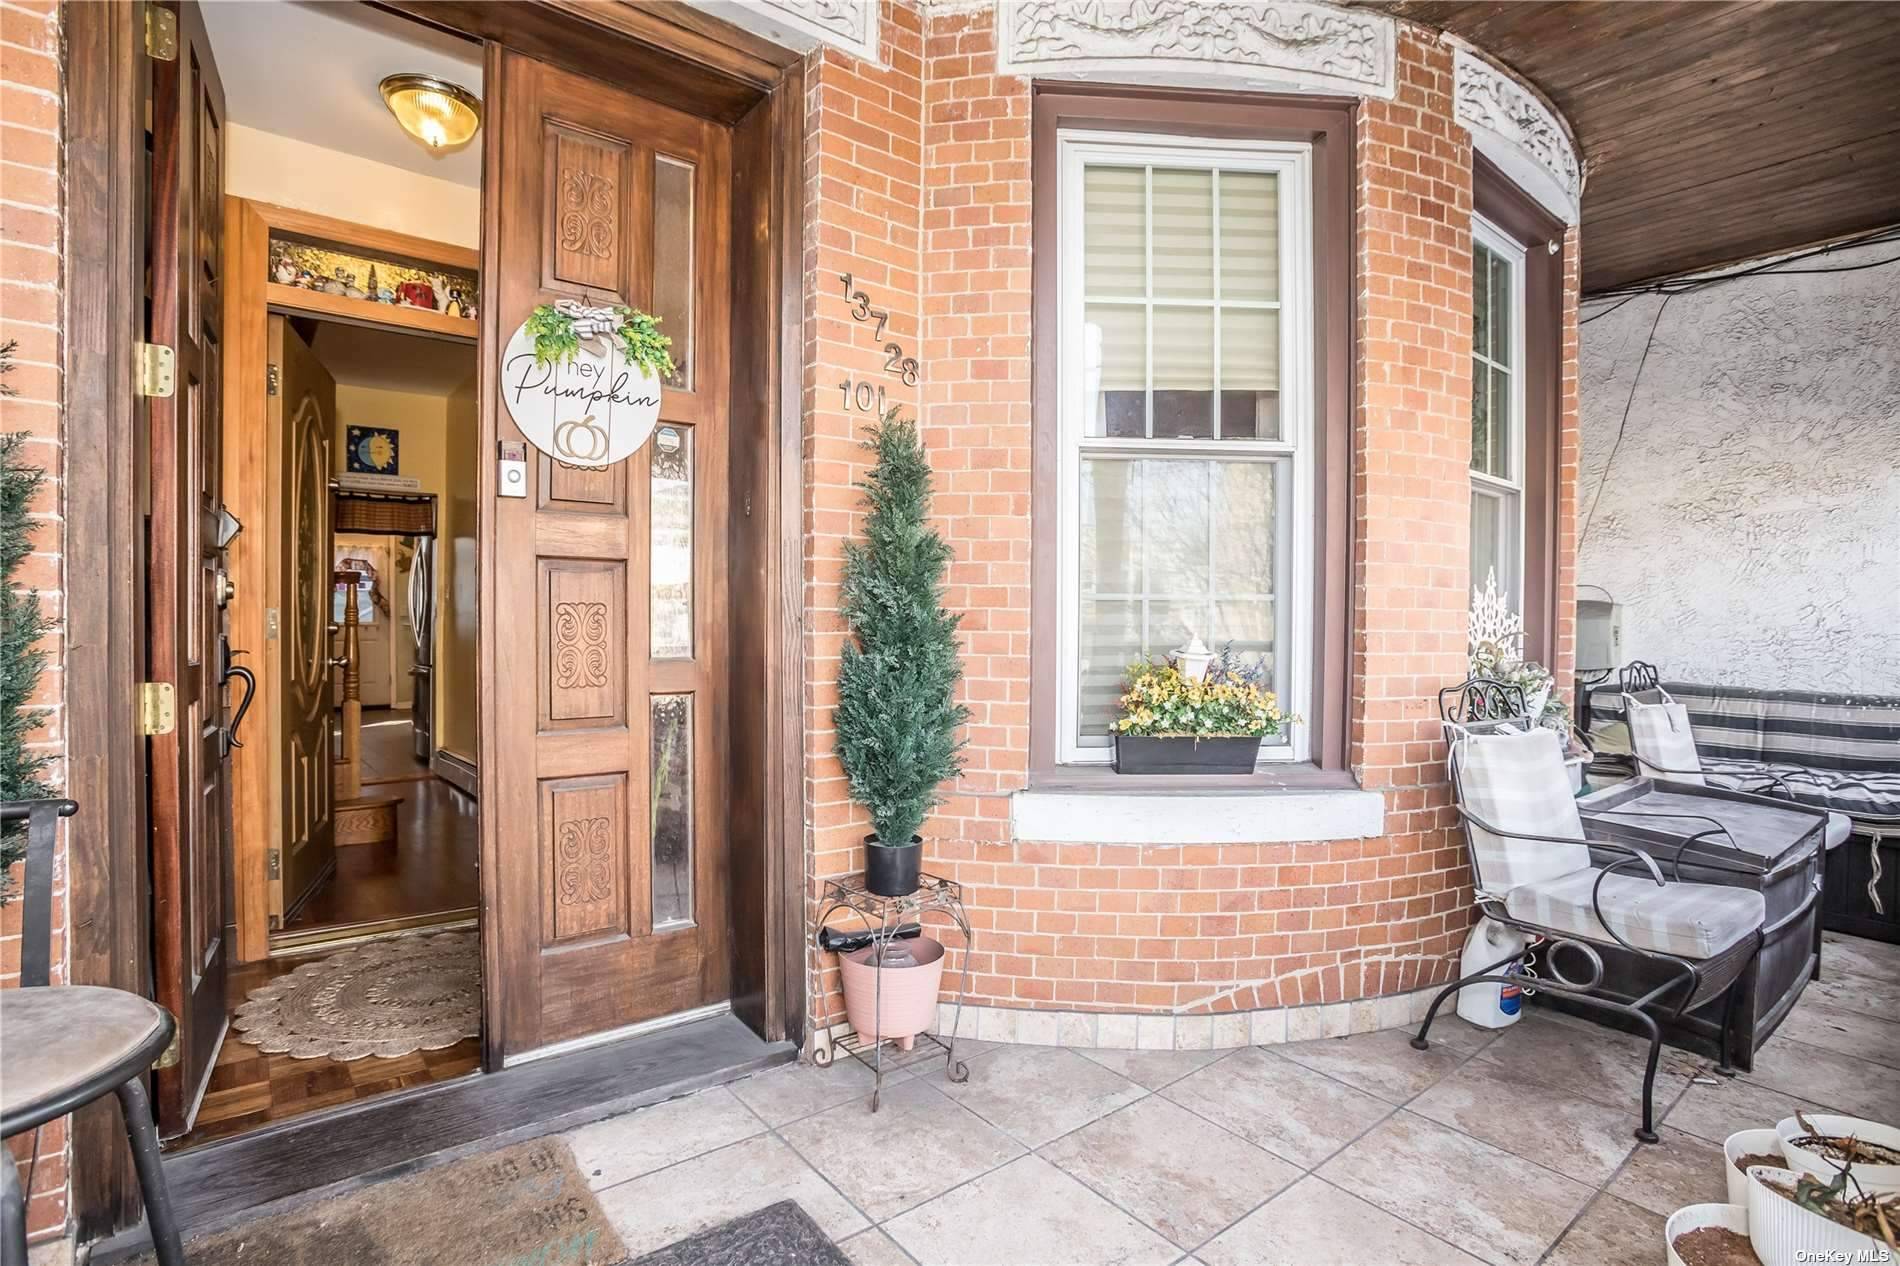 Welcome to this spacious 'brownstone style' home in the heart of Jamaica Queens, convenient to everything !